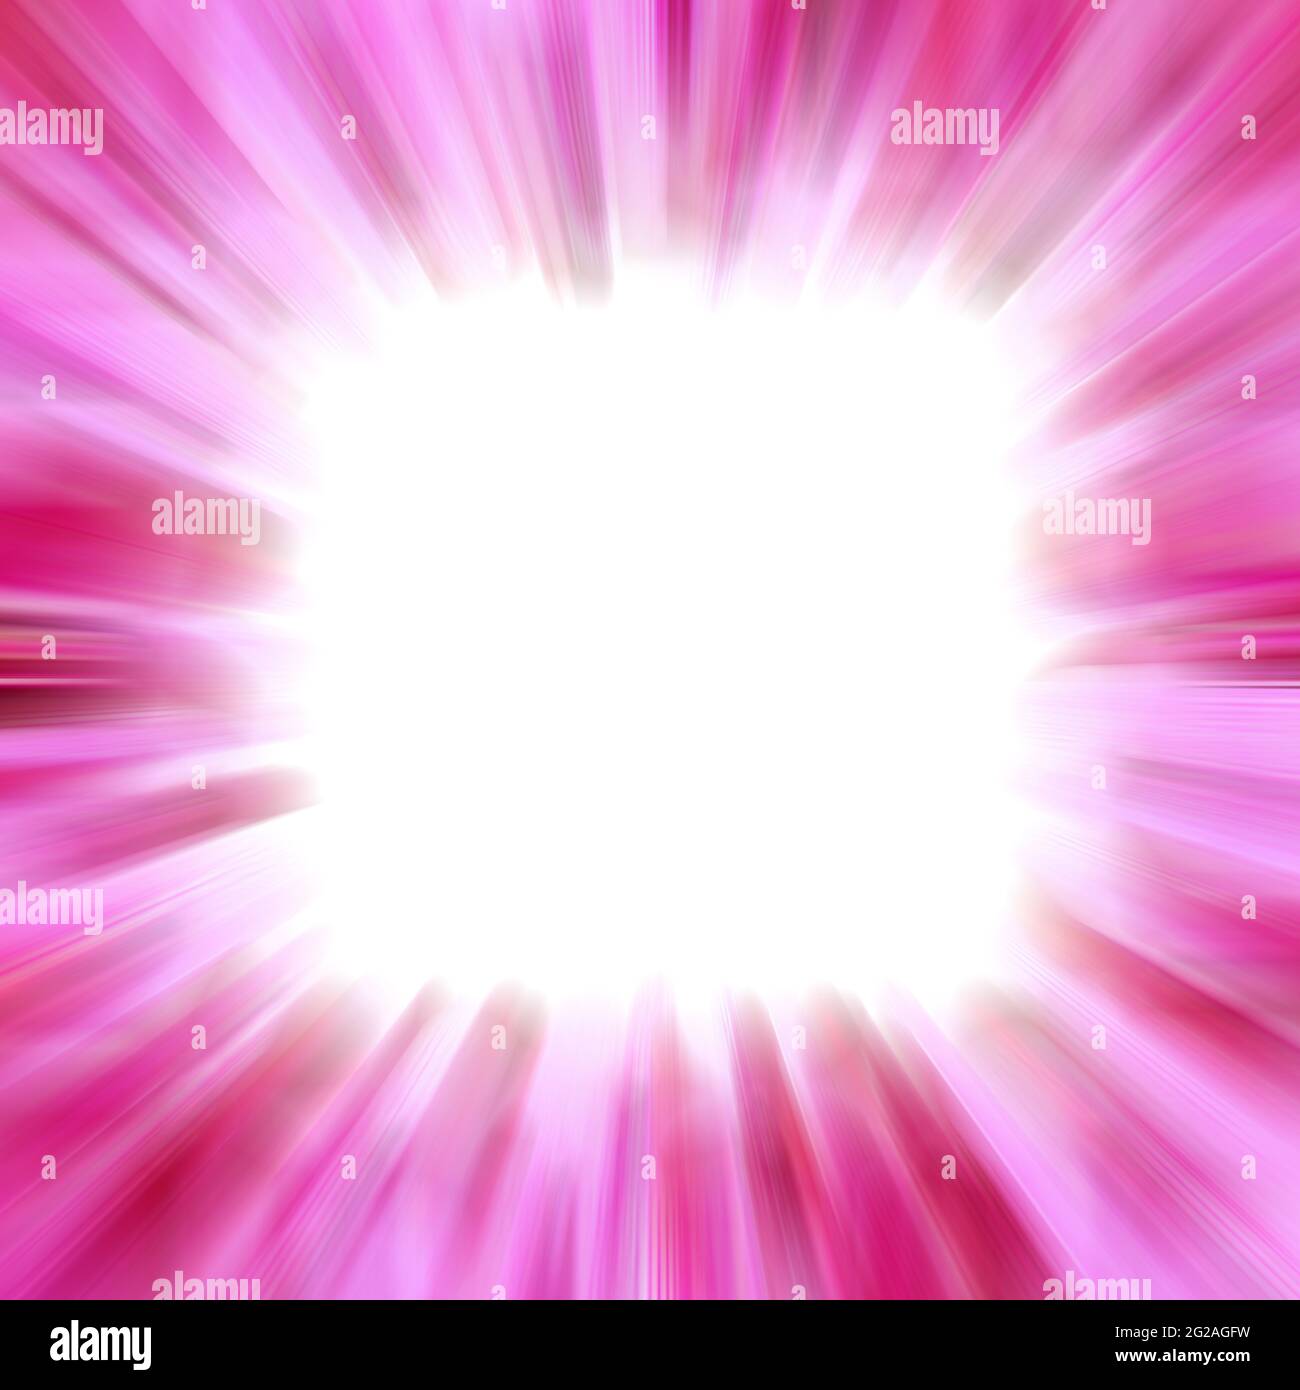 Colorful pink abstract background with motion blur effect Stock Photo